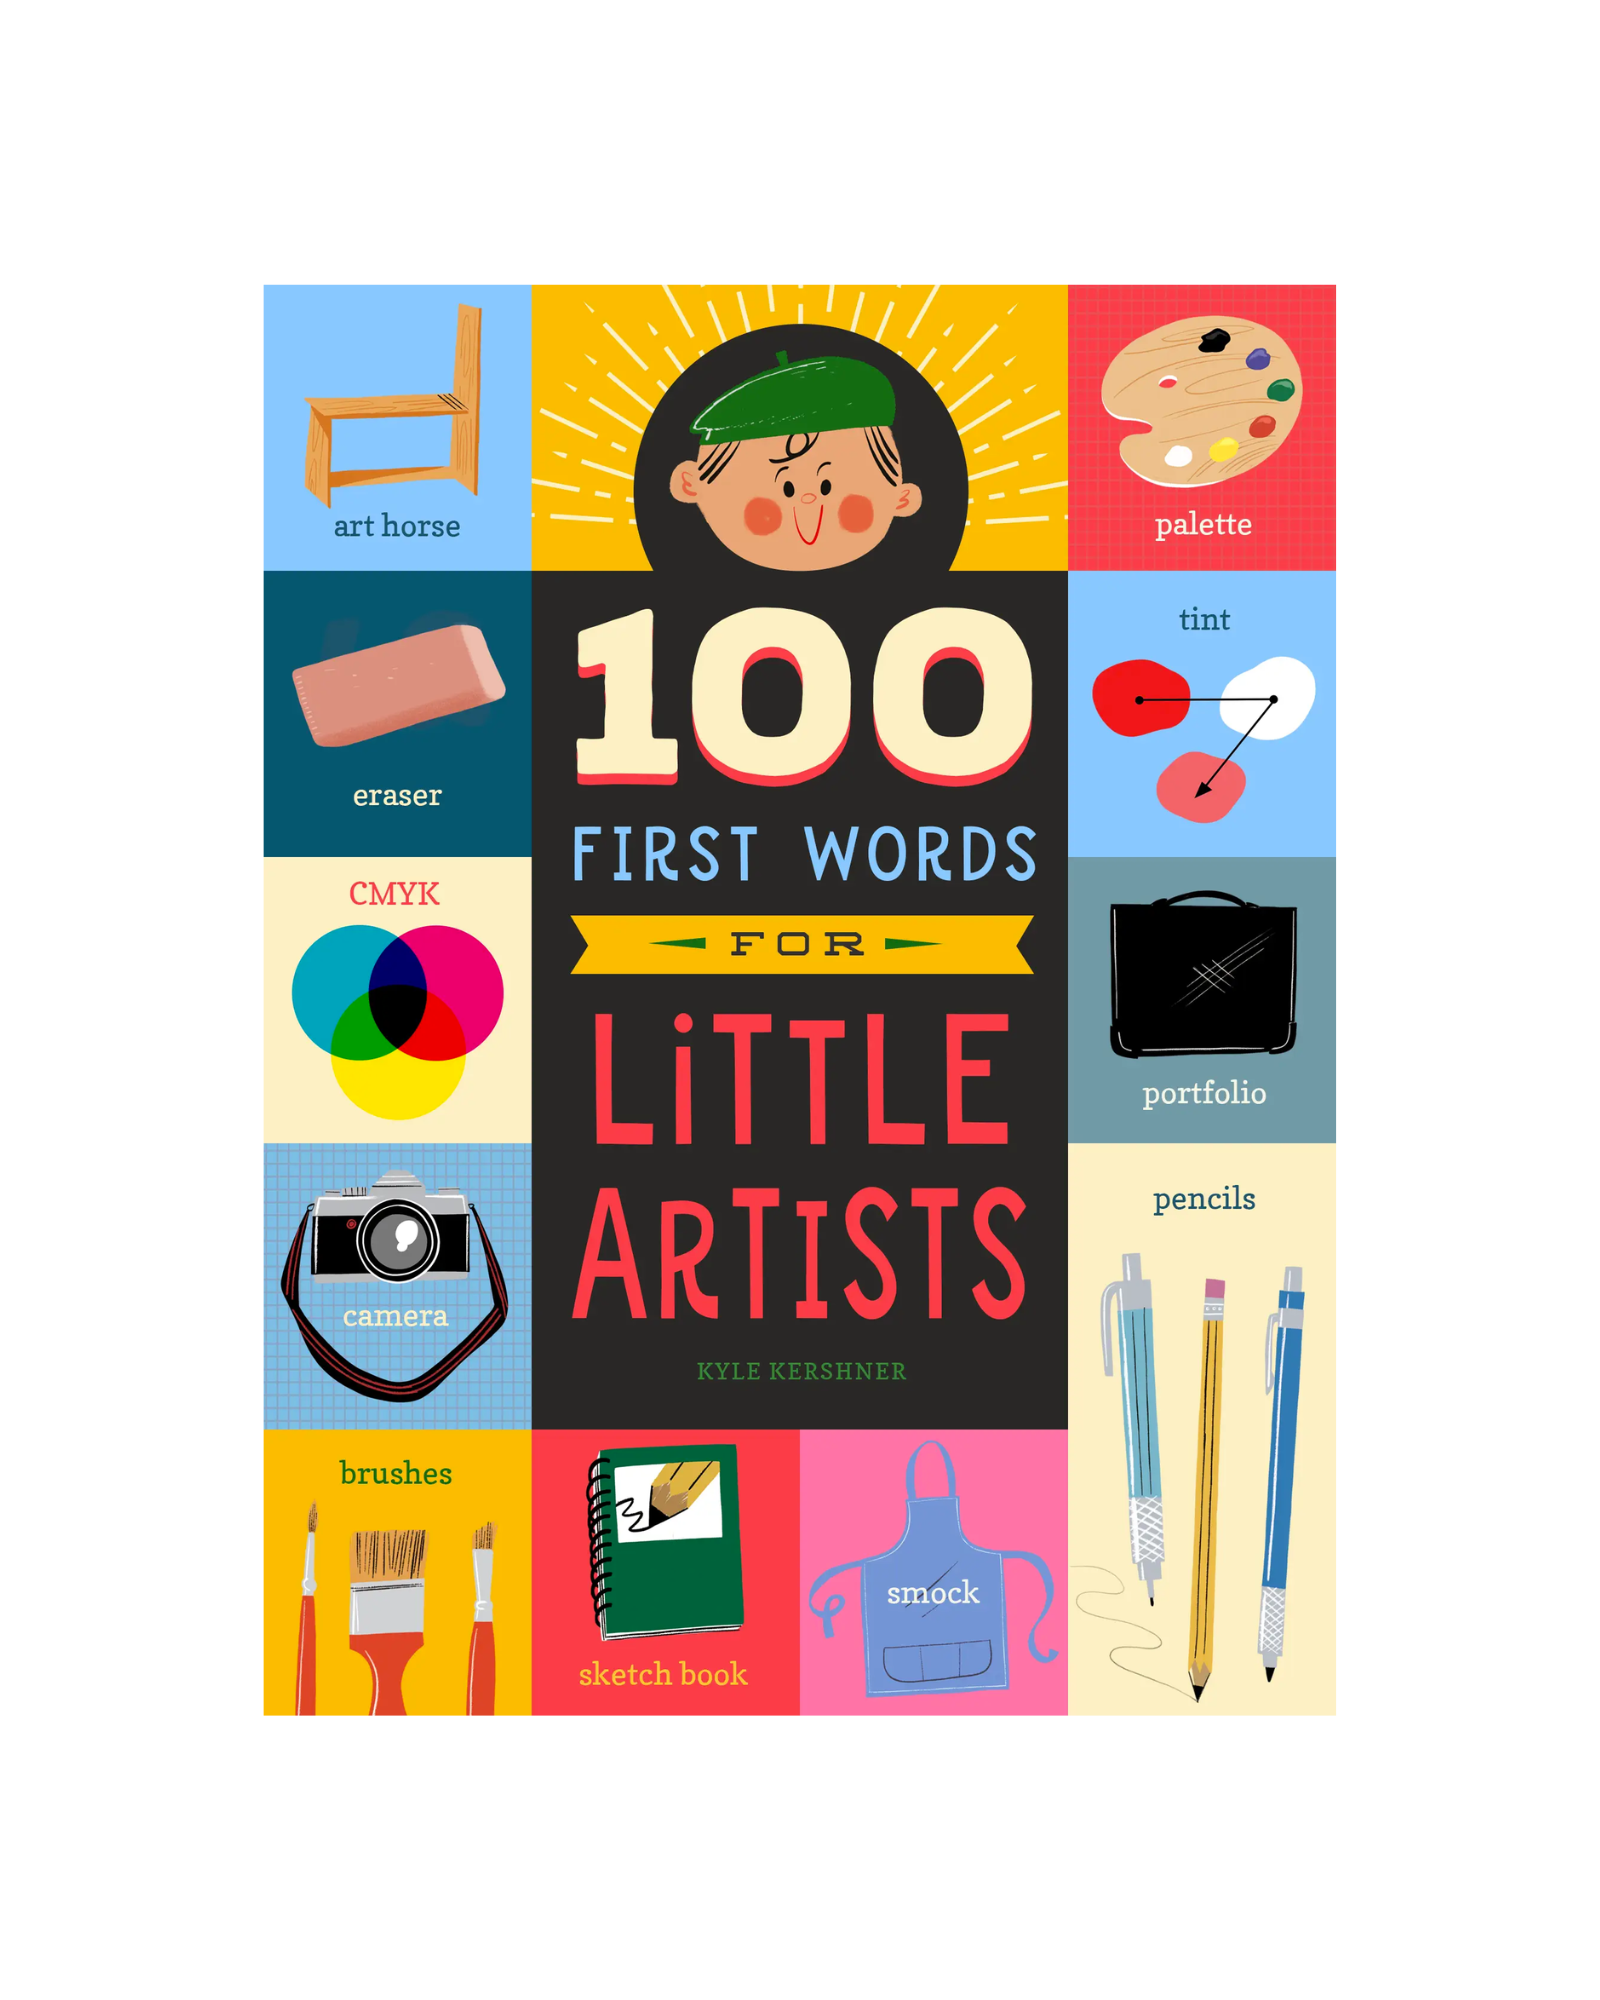 Front cover of a board book titled "100 First Words for Little Artists" with bright squares with art drawings around the edge